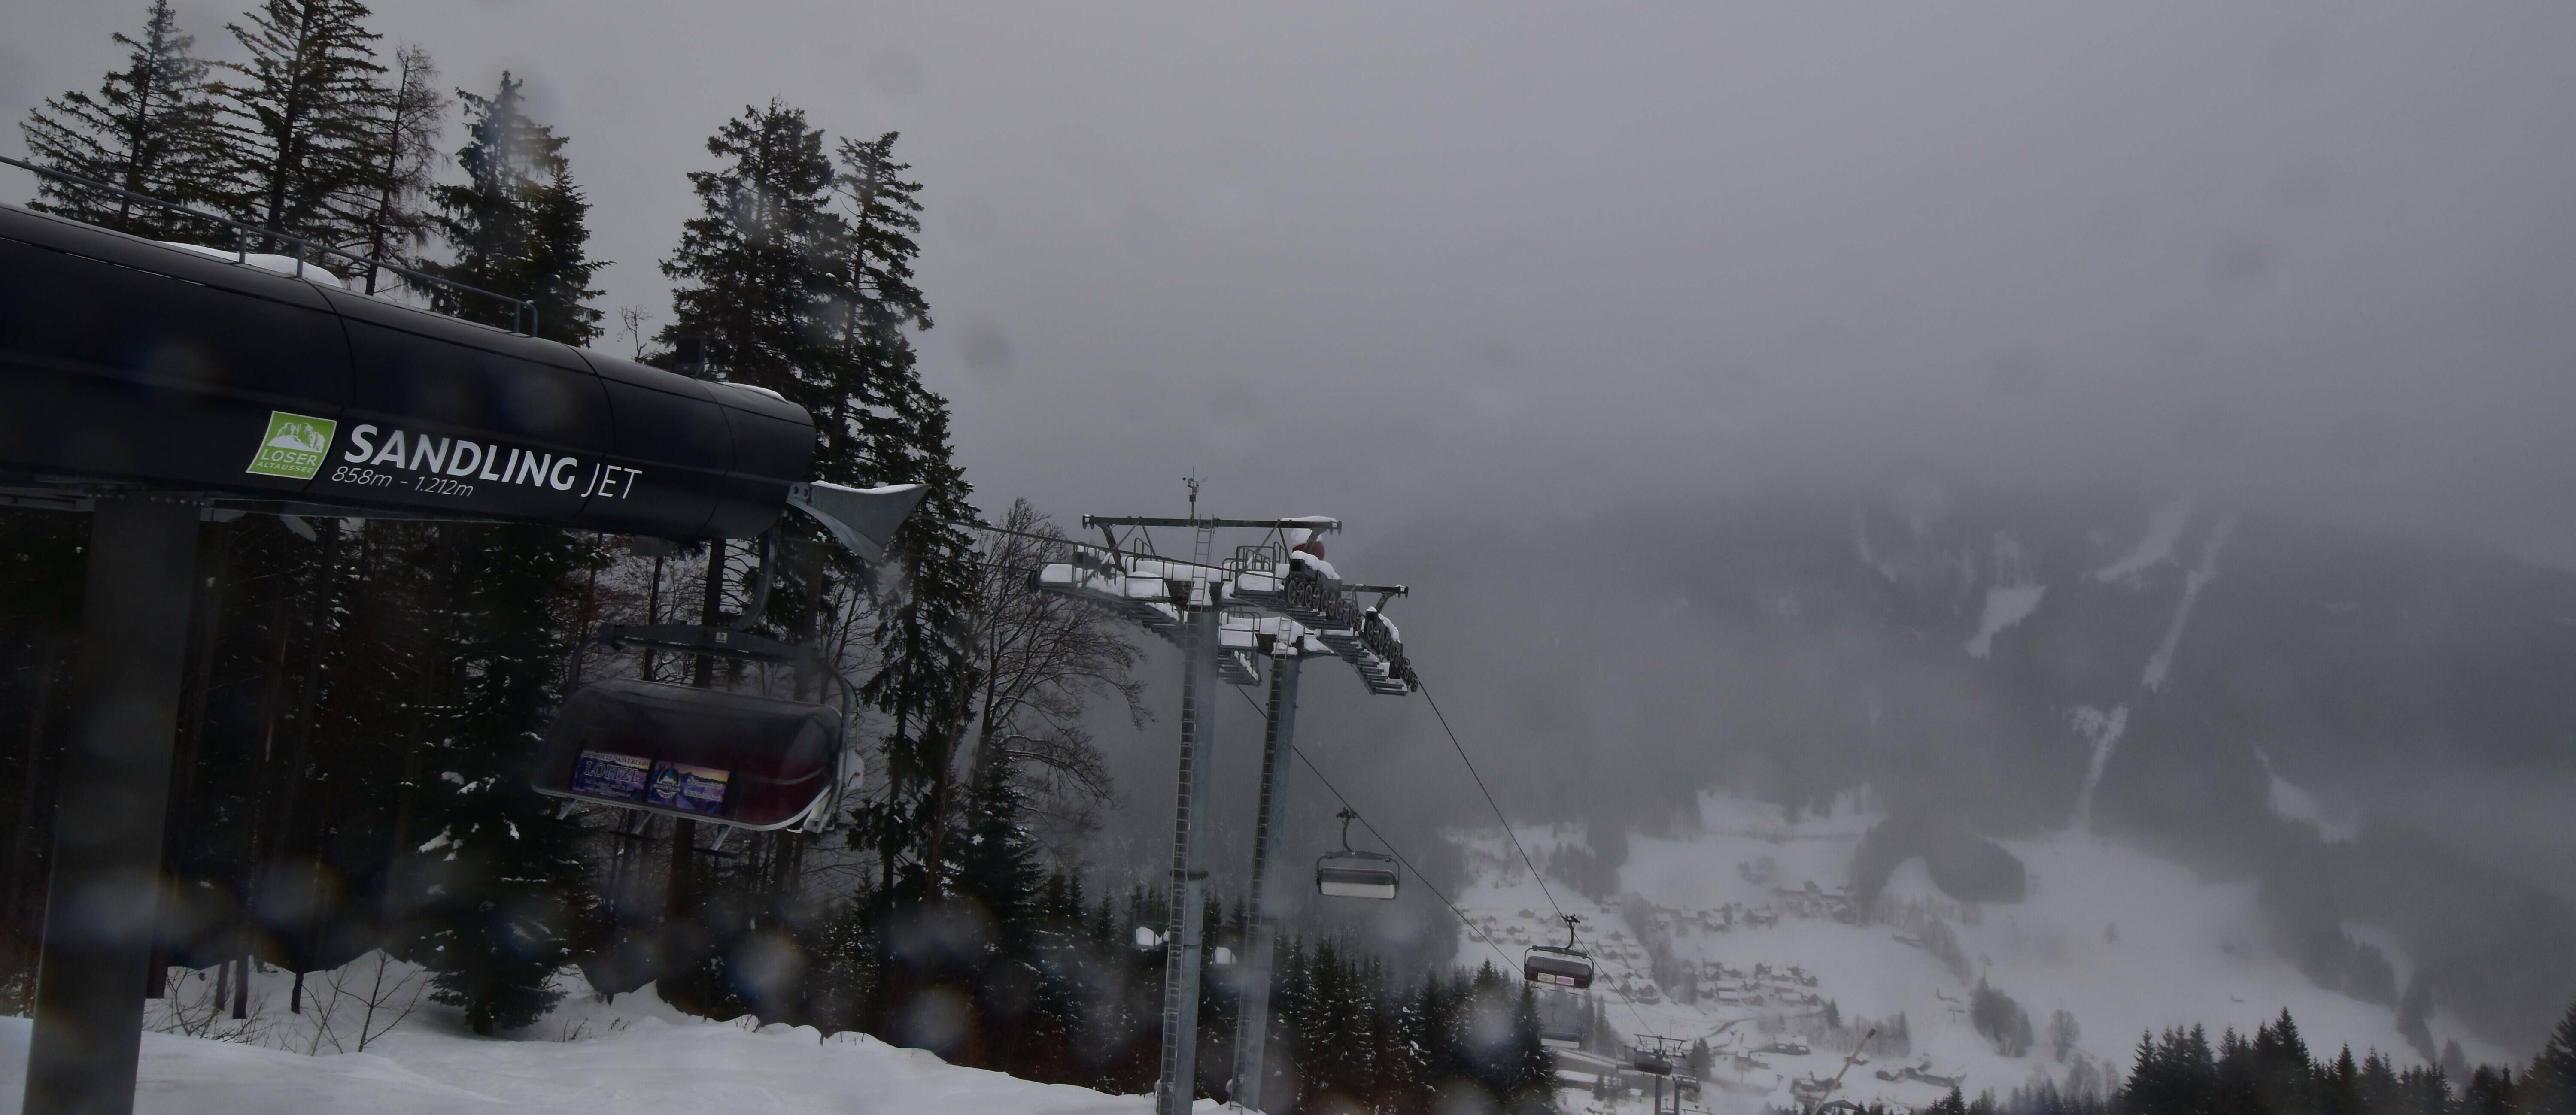 But as the warm front moved further in, the snowfall turned to rain up to about 1500 metres (panomax.com)